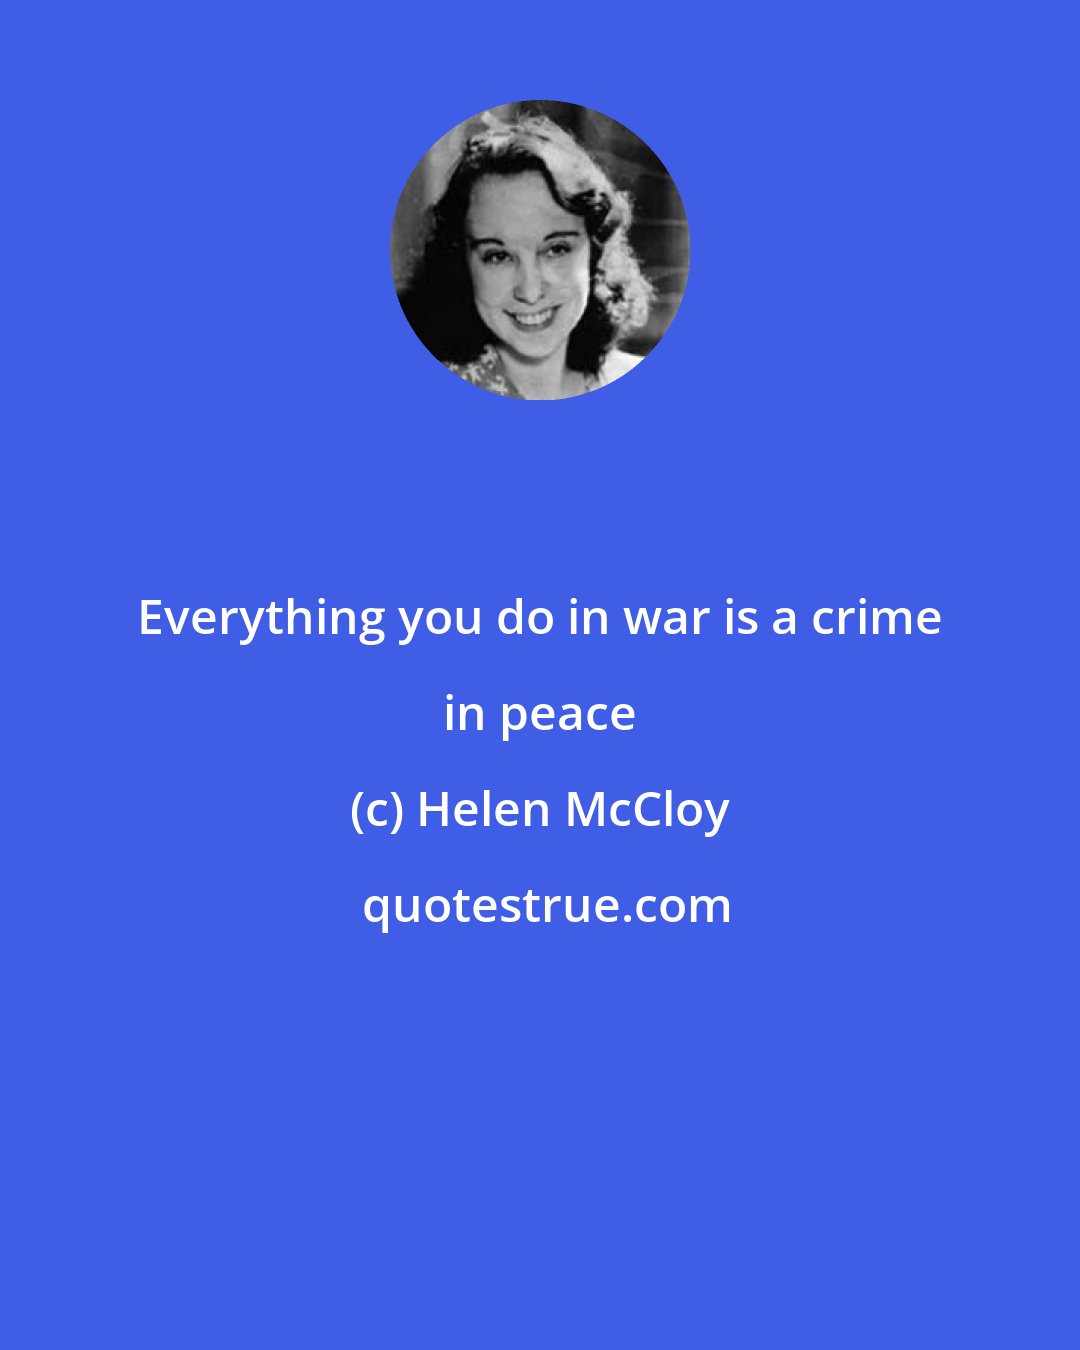 Helen McCloy: Everything you do in war is a crime in peace